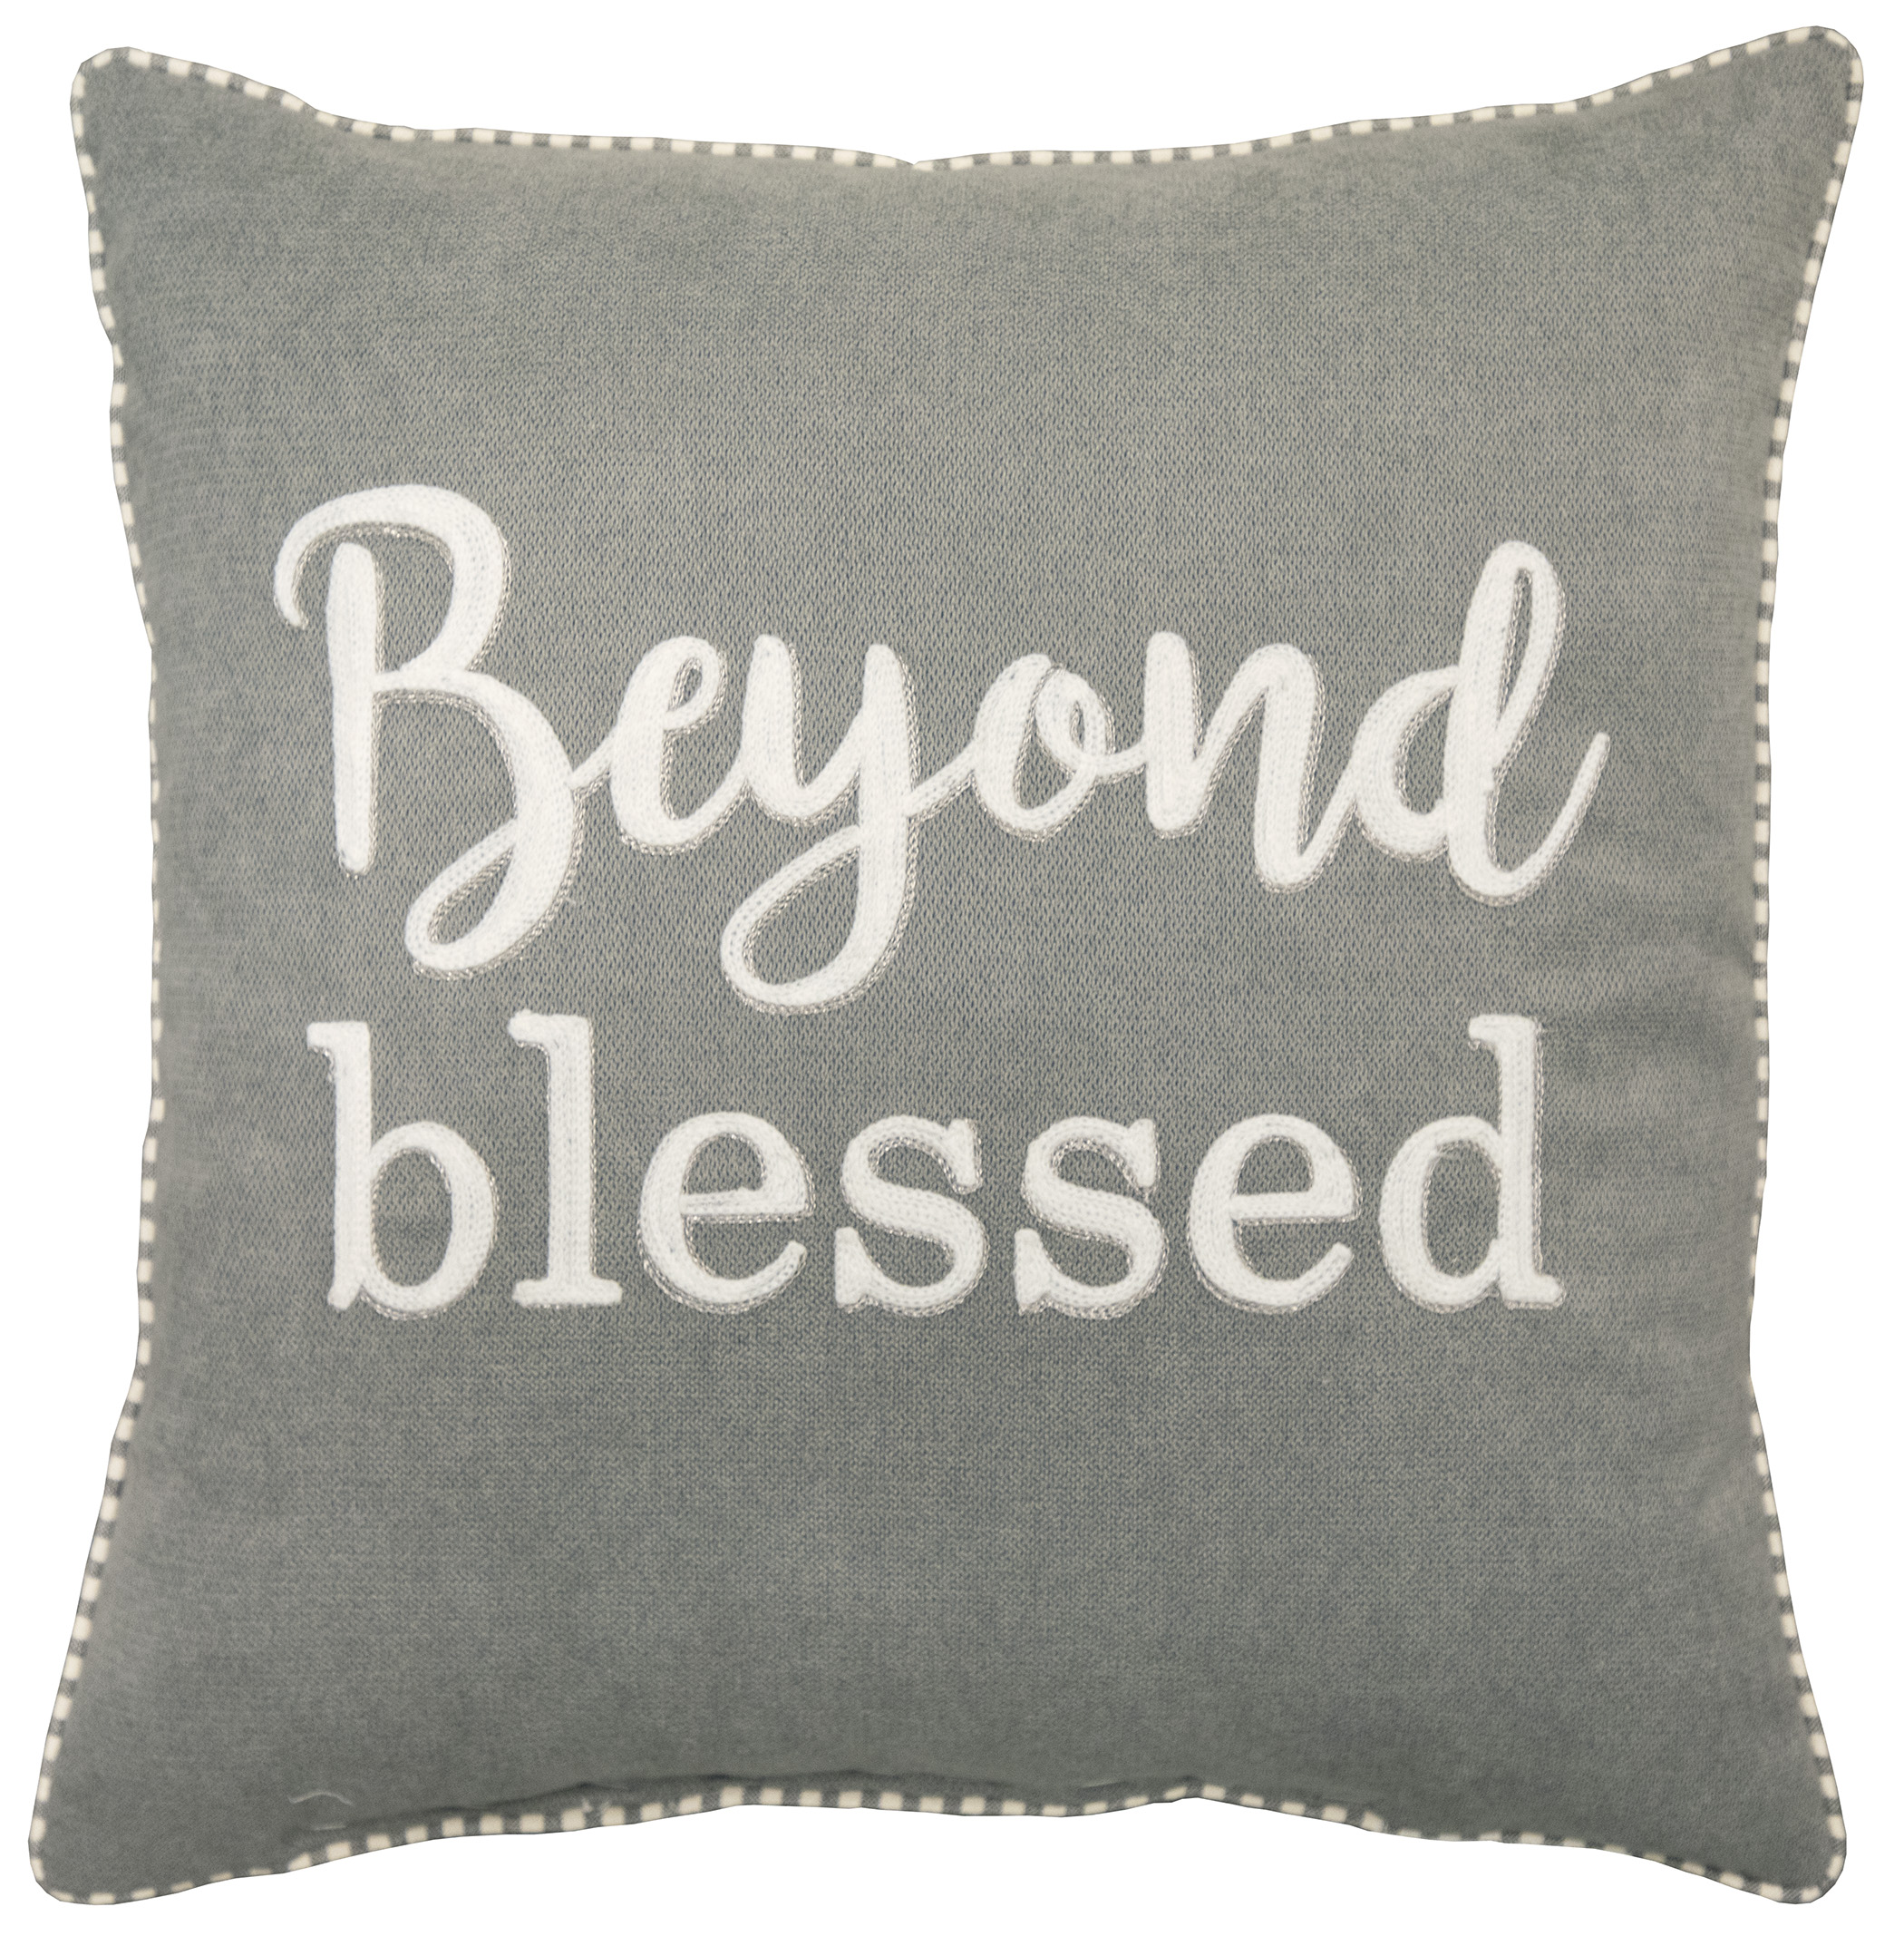 Mainstays Decorative Throw Pillow, Beyond Blessed Sentiment, Square, Grey, 18" x 18", 1Pack - image 1 of 5